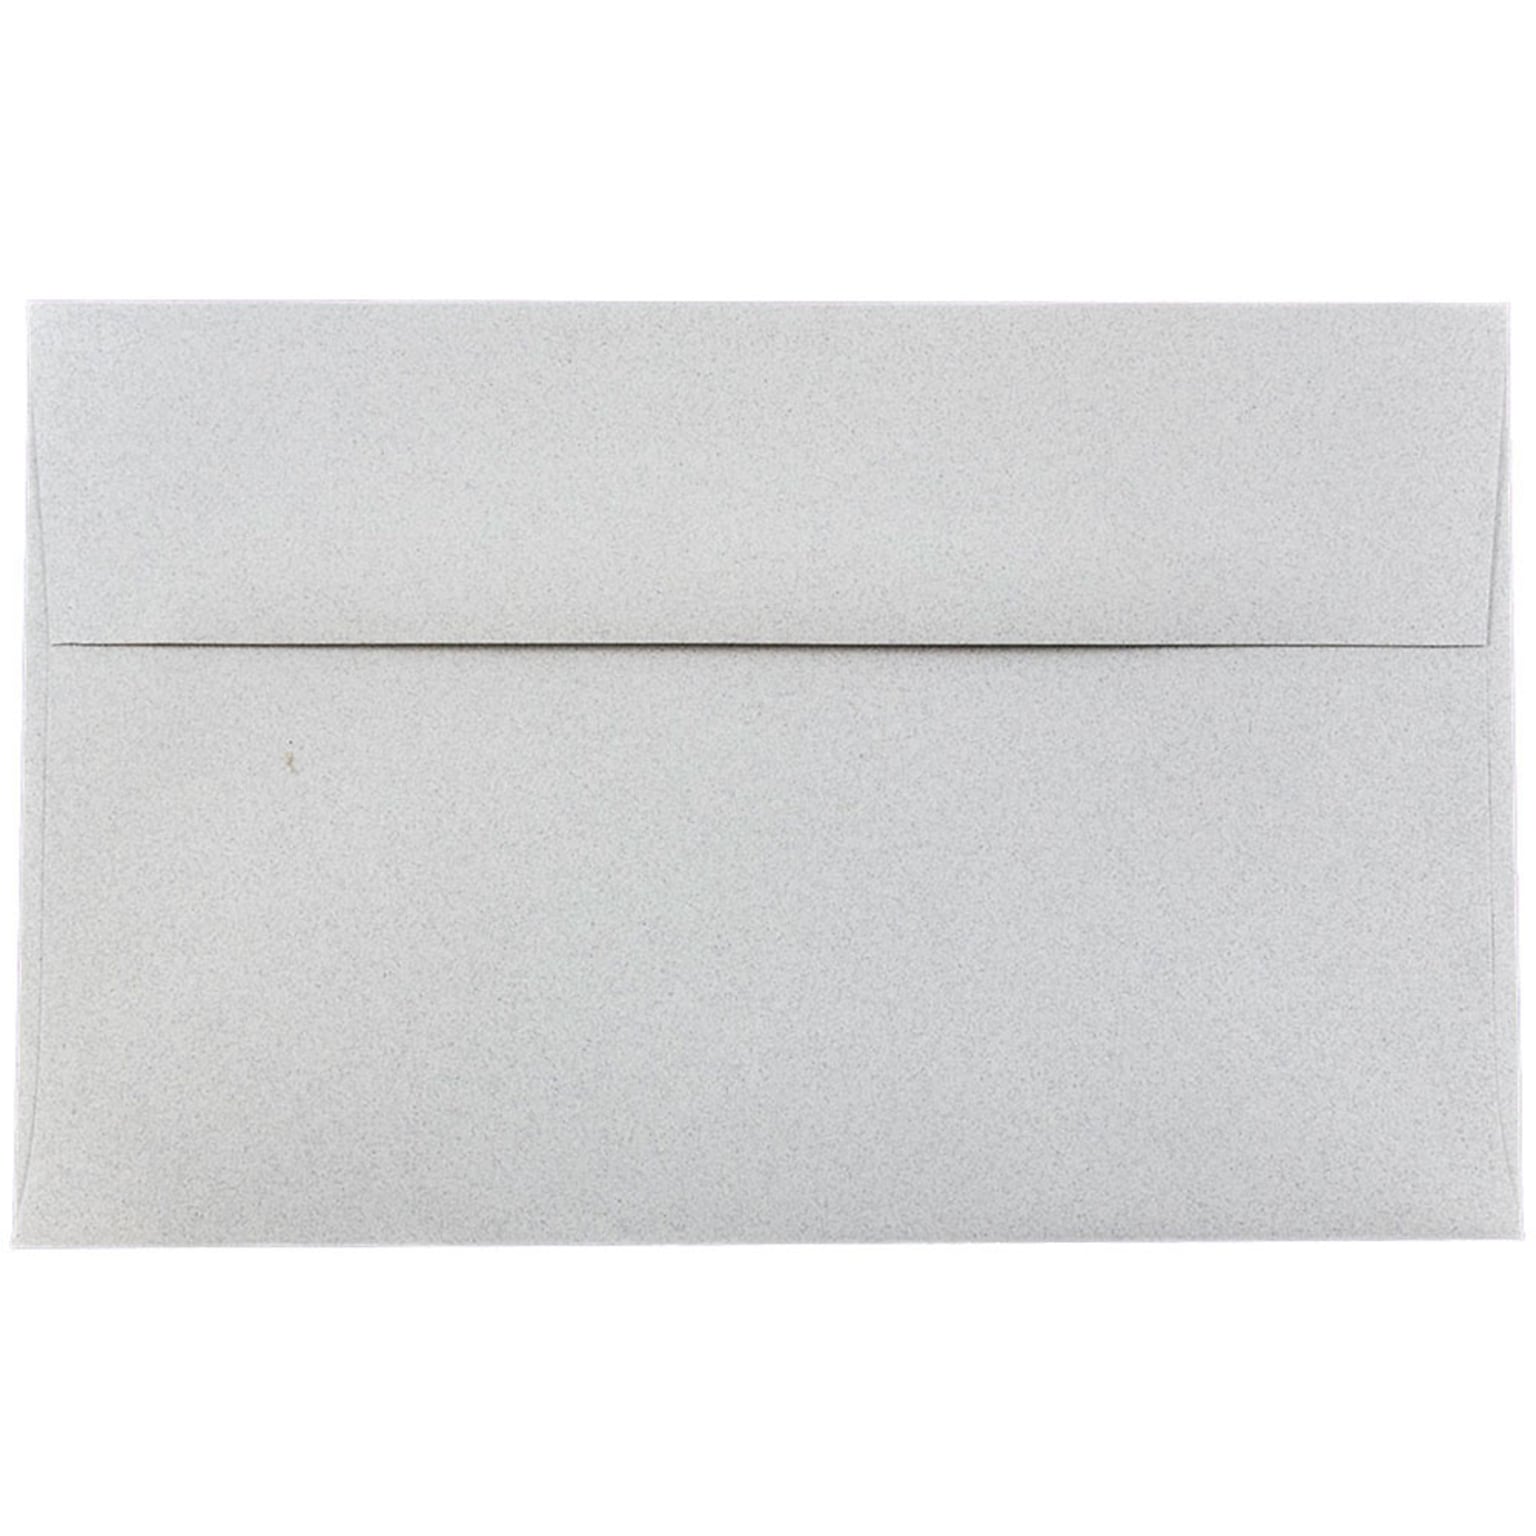 JAM Paper A10 Passport Invitation Envelopes, 6 x 9.5, Granite Silver Recycled, 25/Pack (2831490)